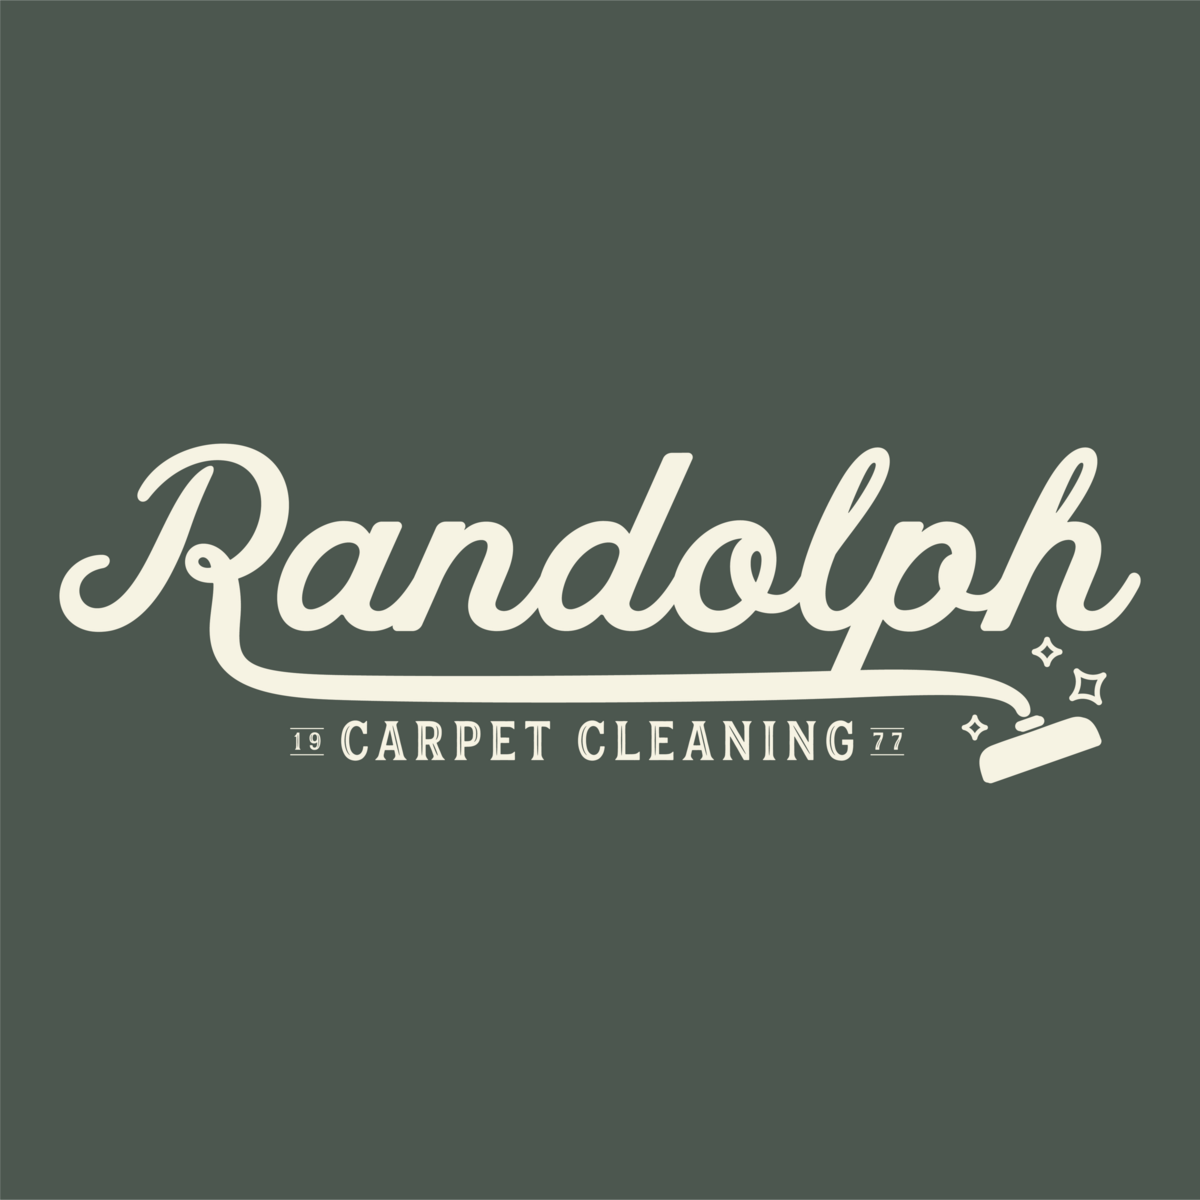 randolph-carpet-cleaning-logoswbackground-02